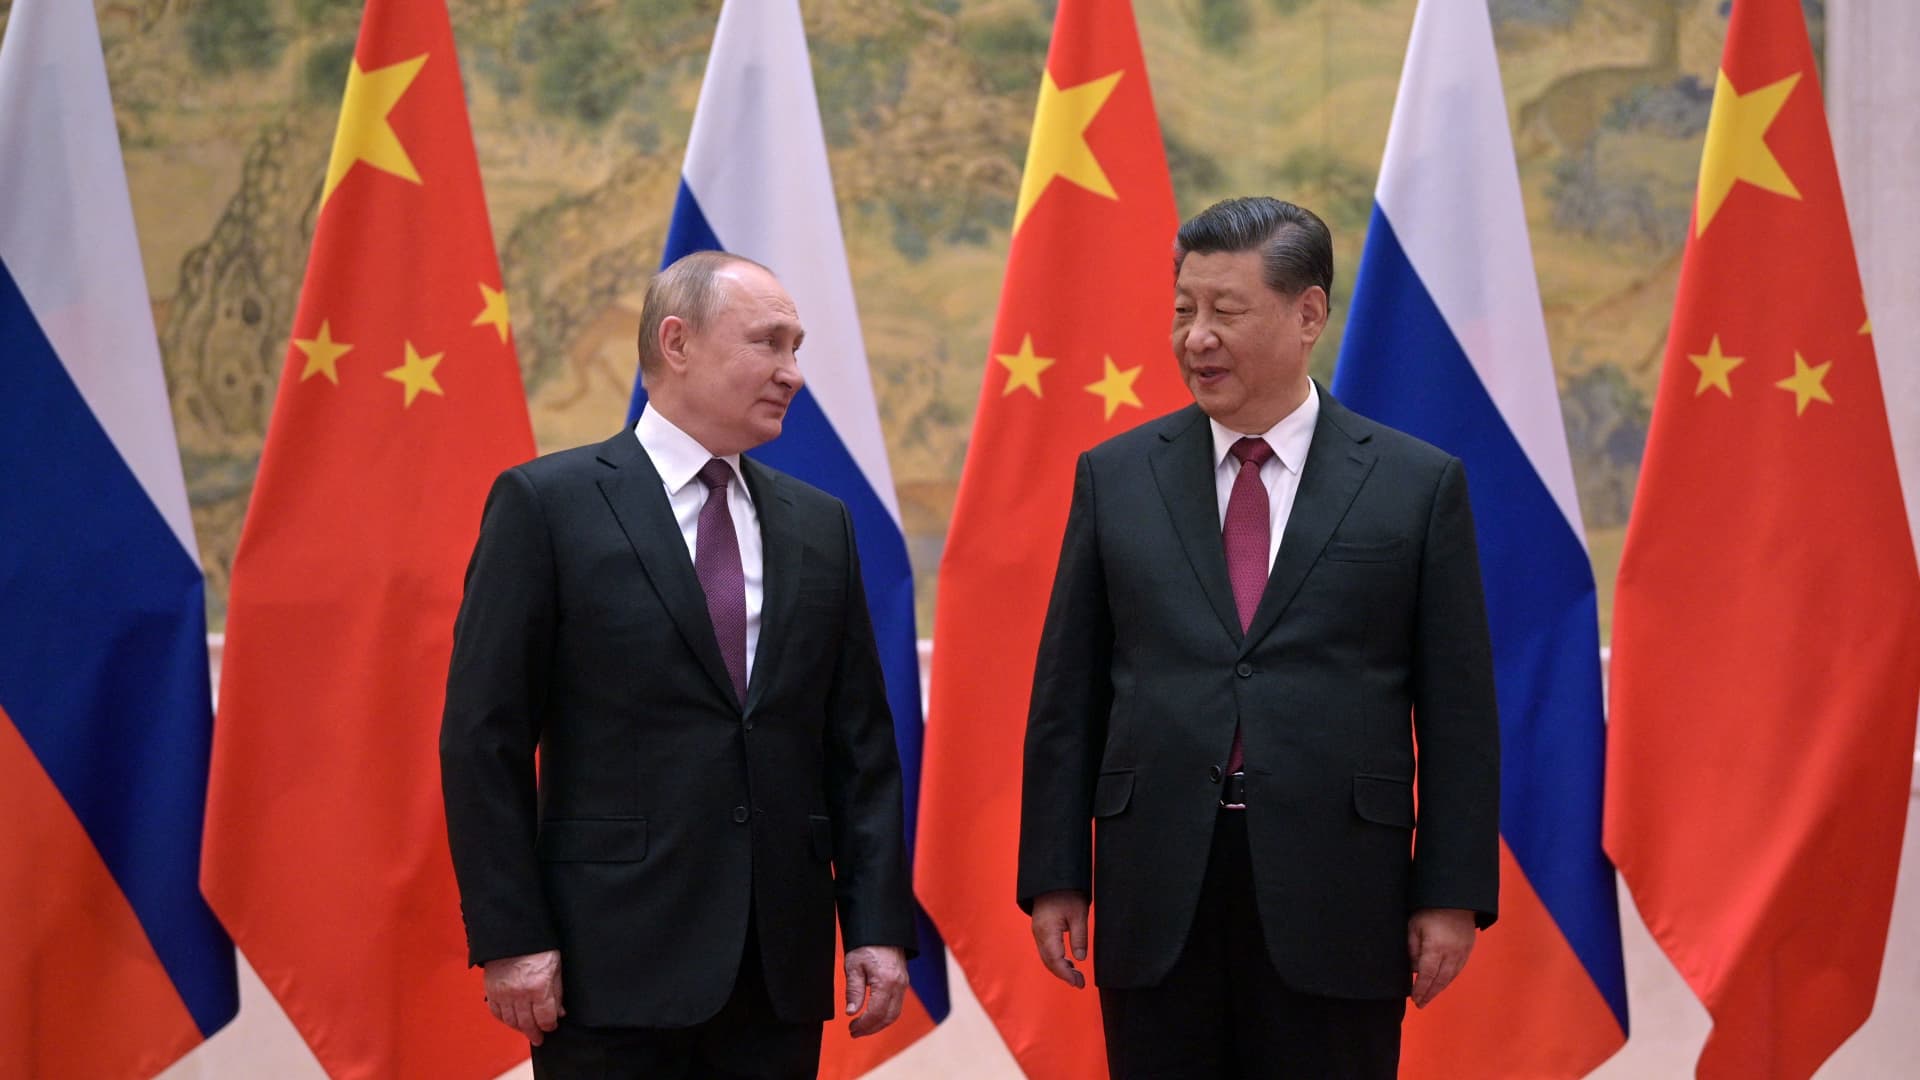 Russia has increasingly looked to China for support as its relations with the West deteriorate, and Beijing has called for a diplomatic resolution to the war in Ukraine.